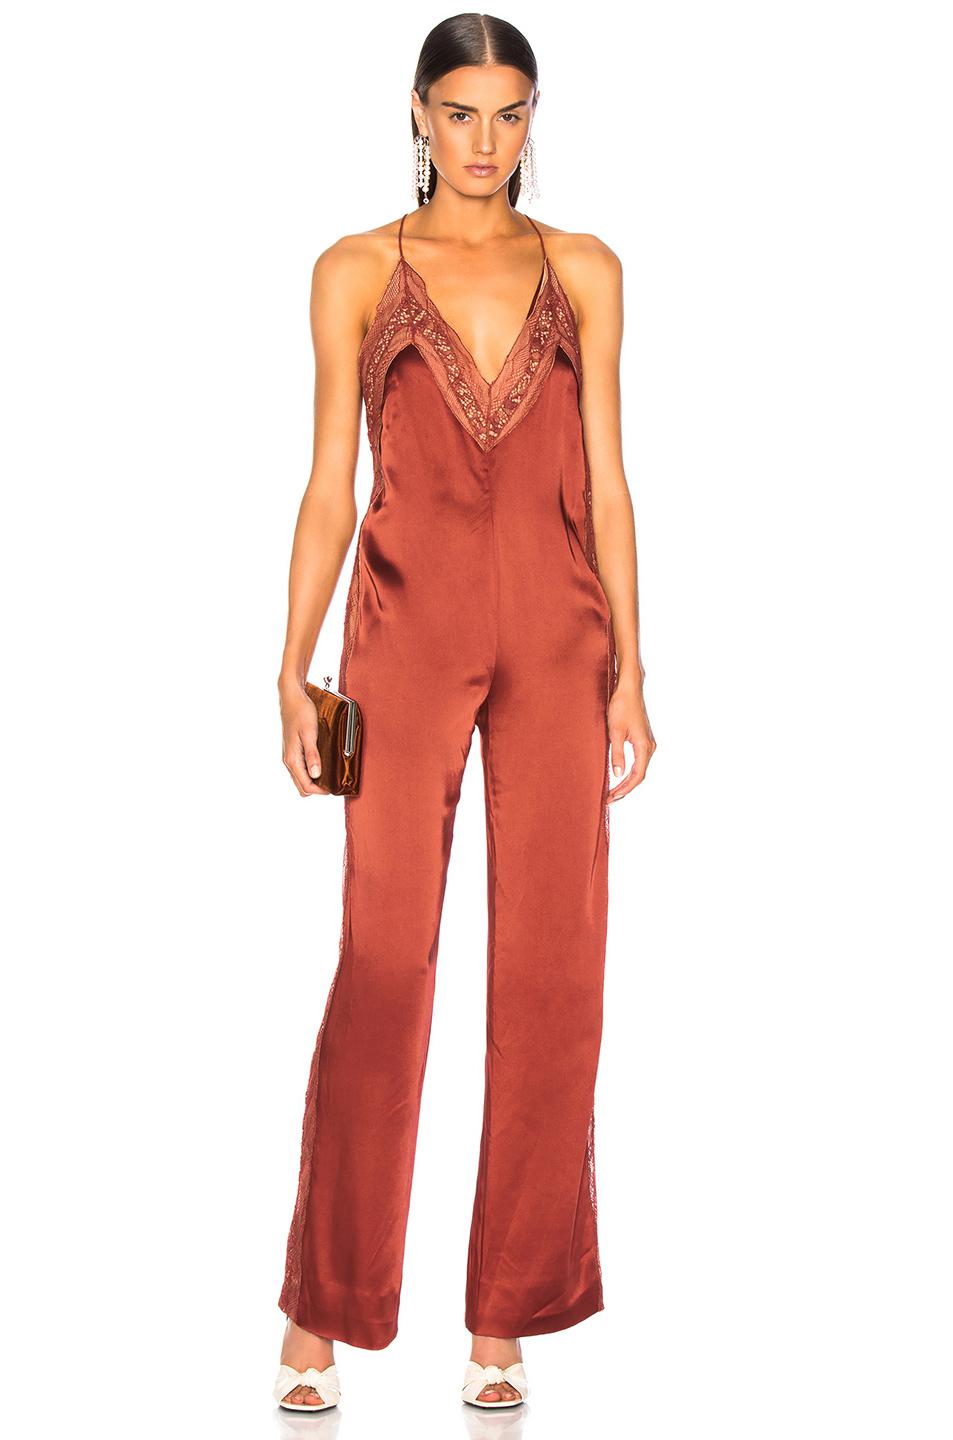 Jonathan Simkhai Synthetic Lingerie Jumpsuit in Red - Lyst